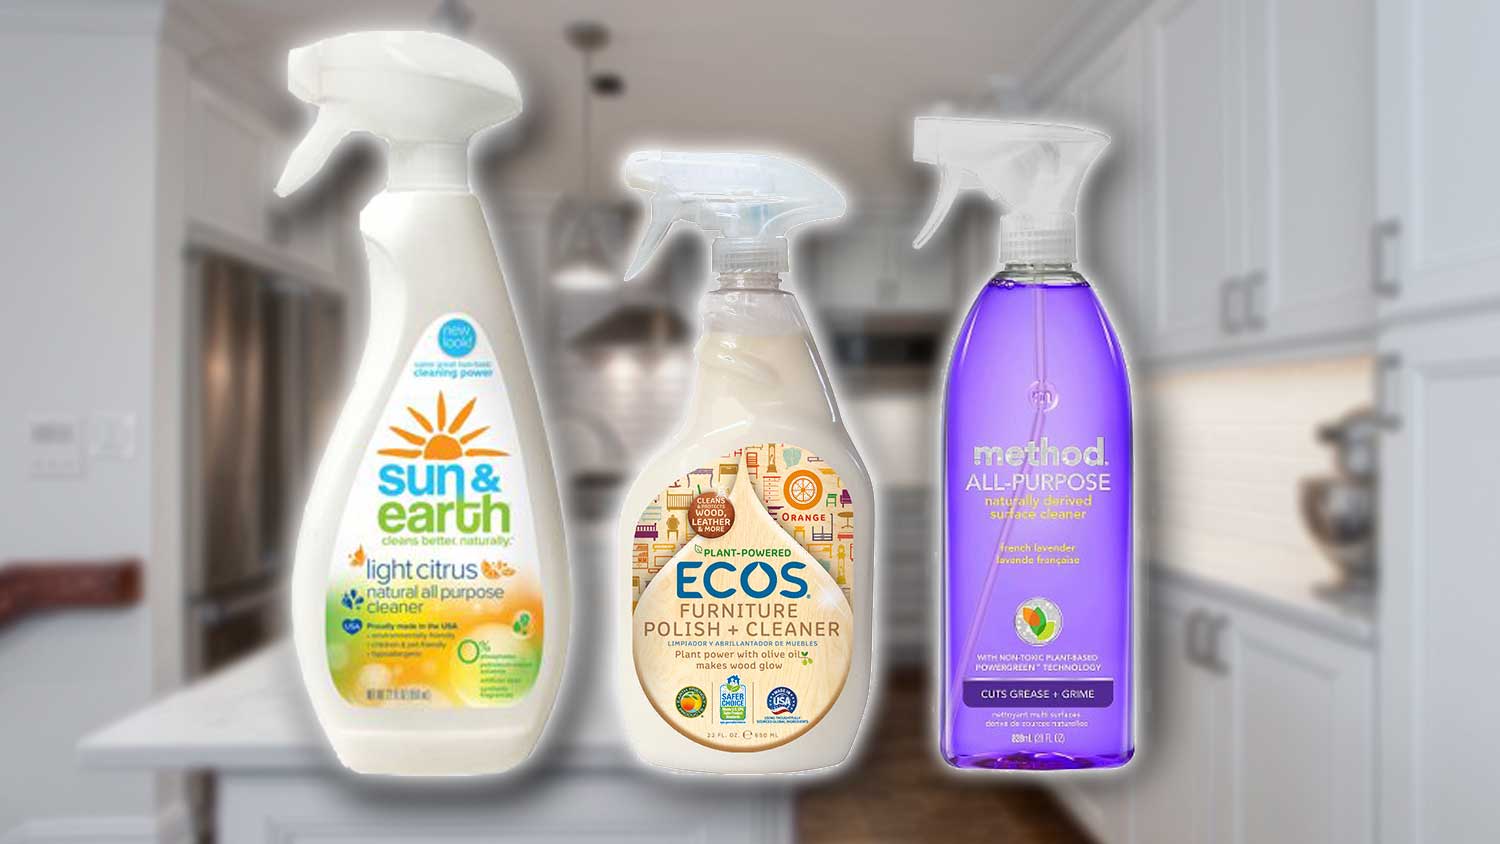 The Complete Guide to Cruelty-Free Cleaning Products | LIVEKINDLY